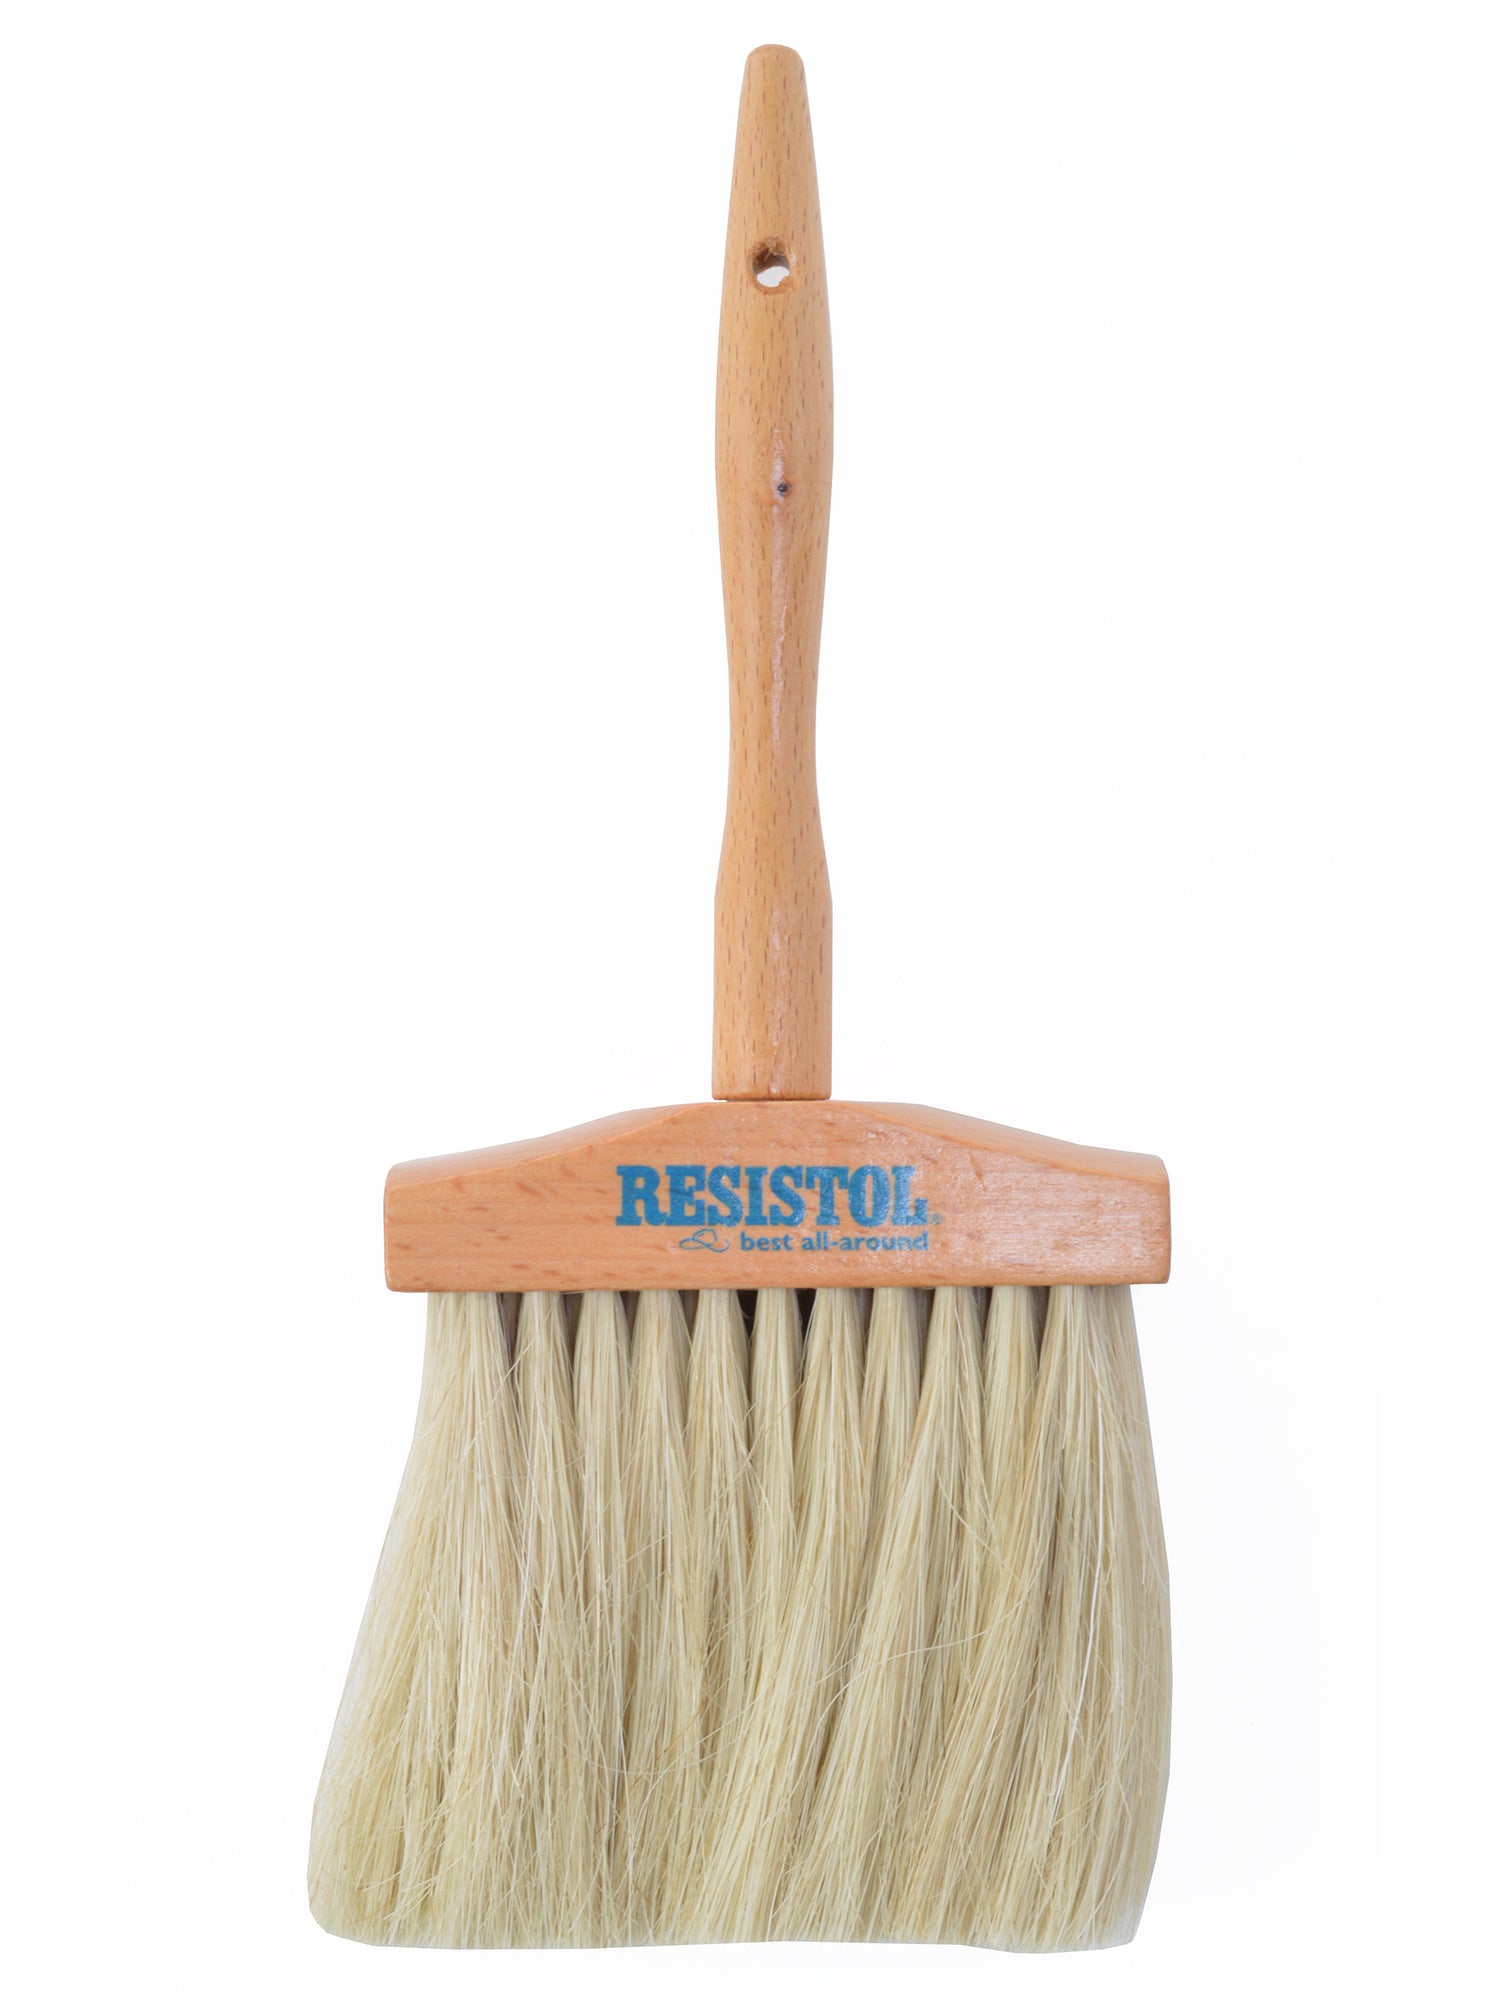 Resistol Hat Crown Brush For Light Colored Hats